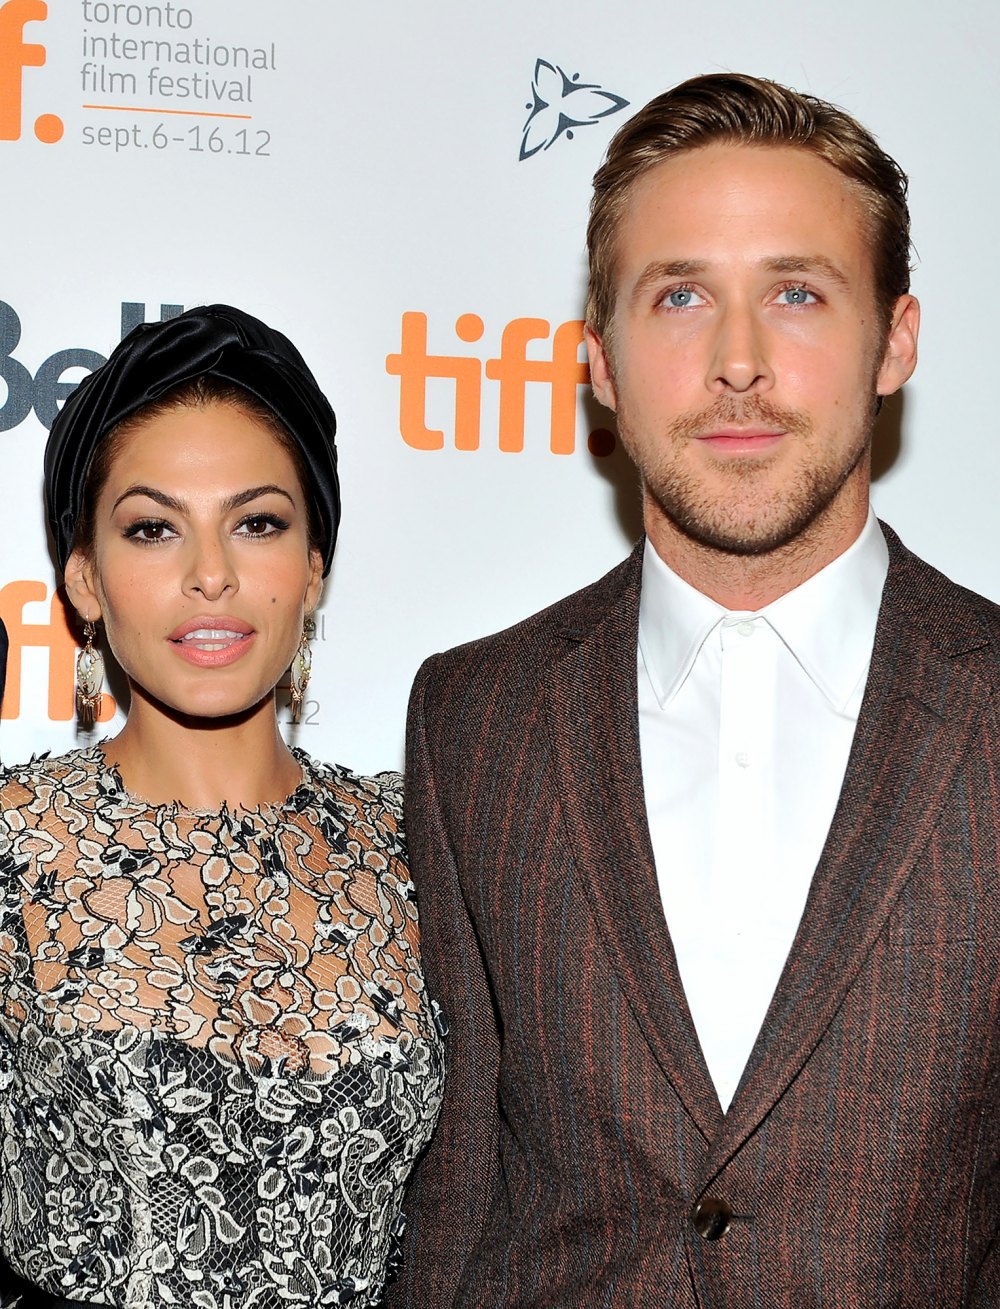 Ryan Gosling Subtle SNL Reference to Eva Mendes Made Her So Happy 3